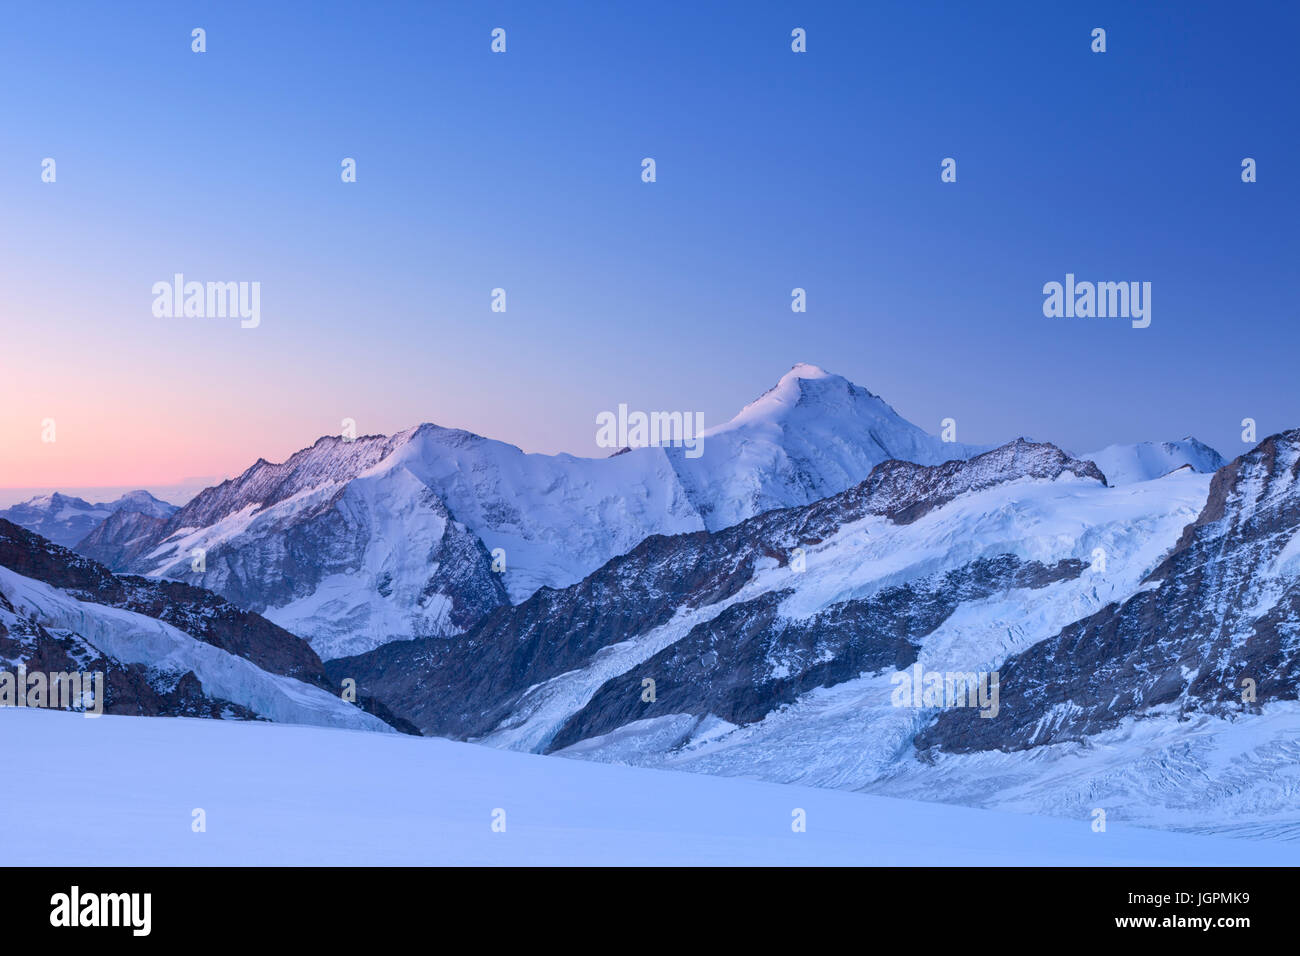 Dawn at Jungfraujoch in Switzerland on a clear morning. Stock Photo